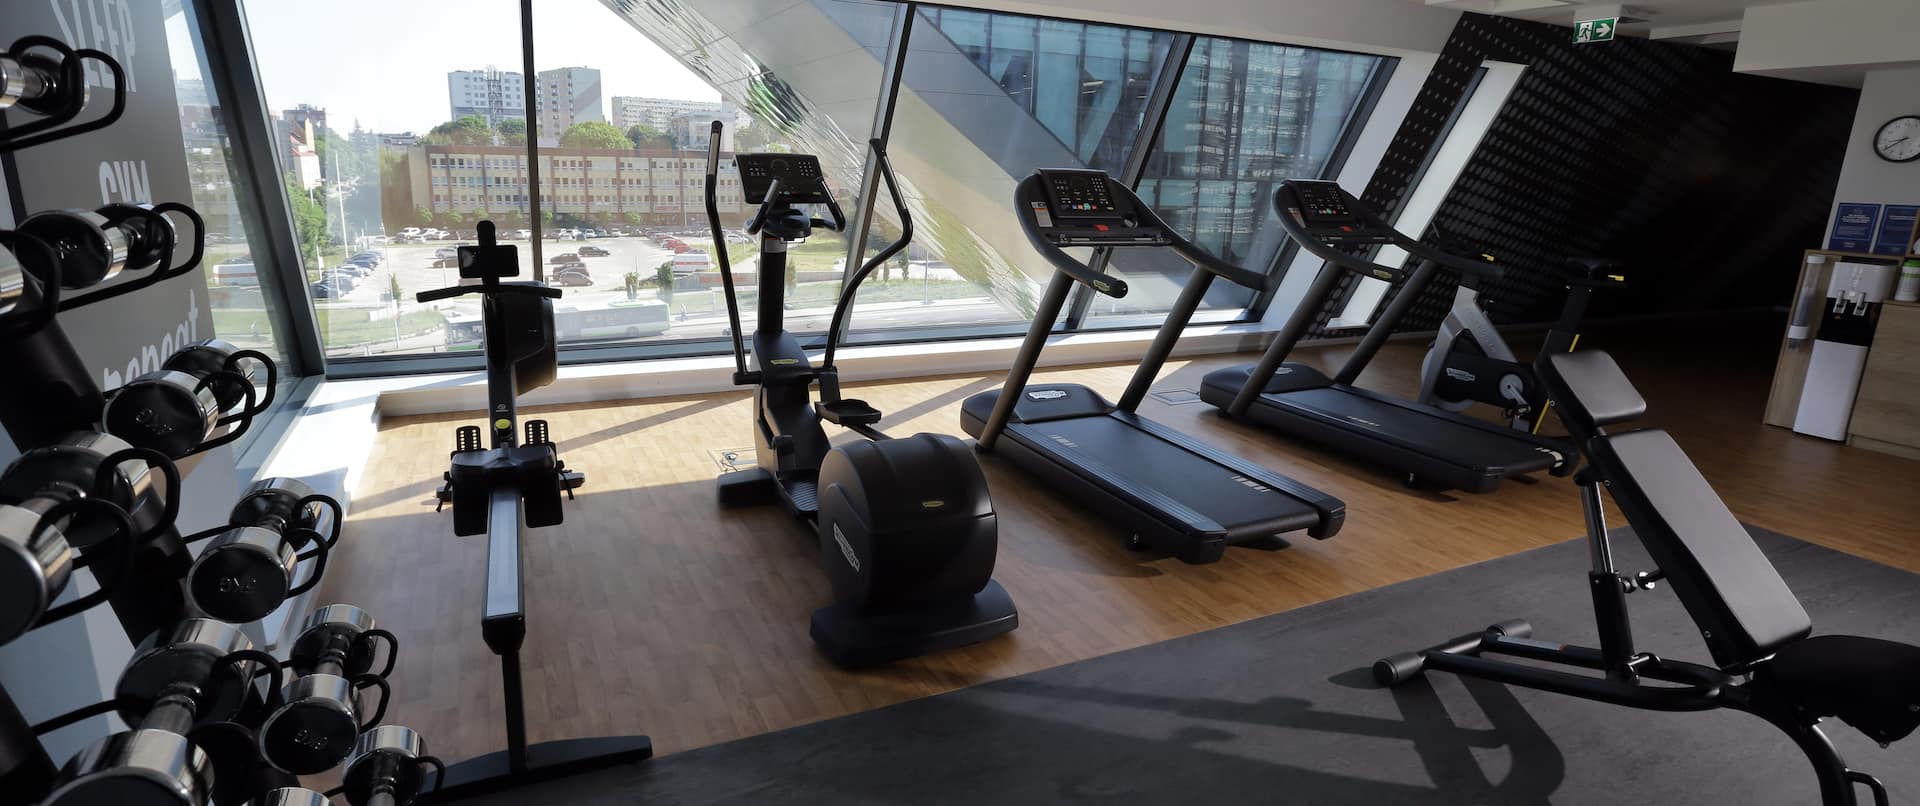 Weights Treadmills and Elliptical Machine in Fitness Center